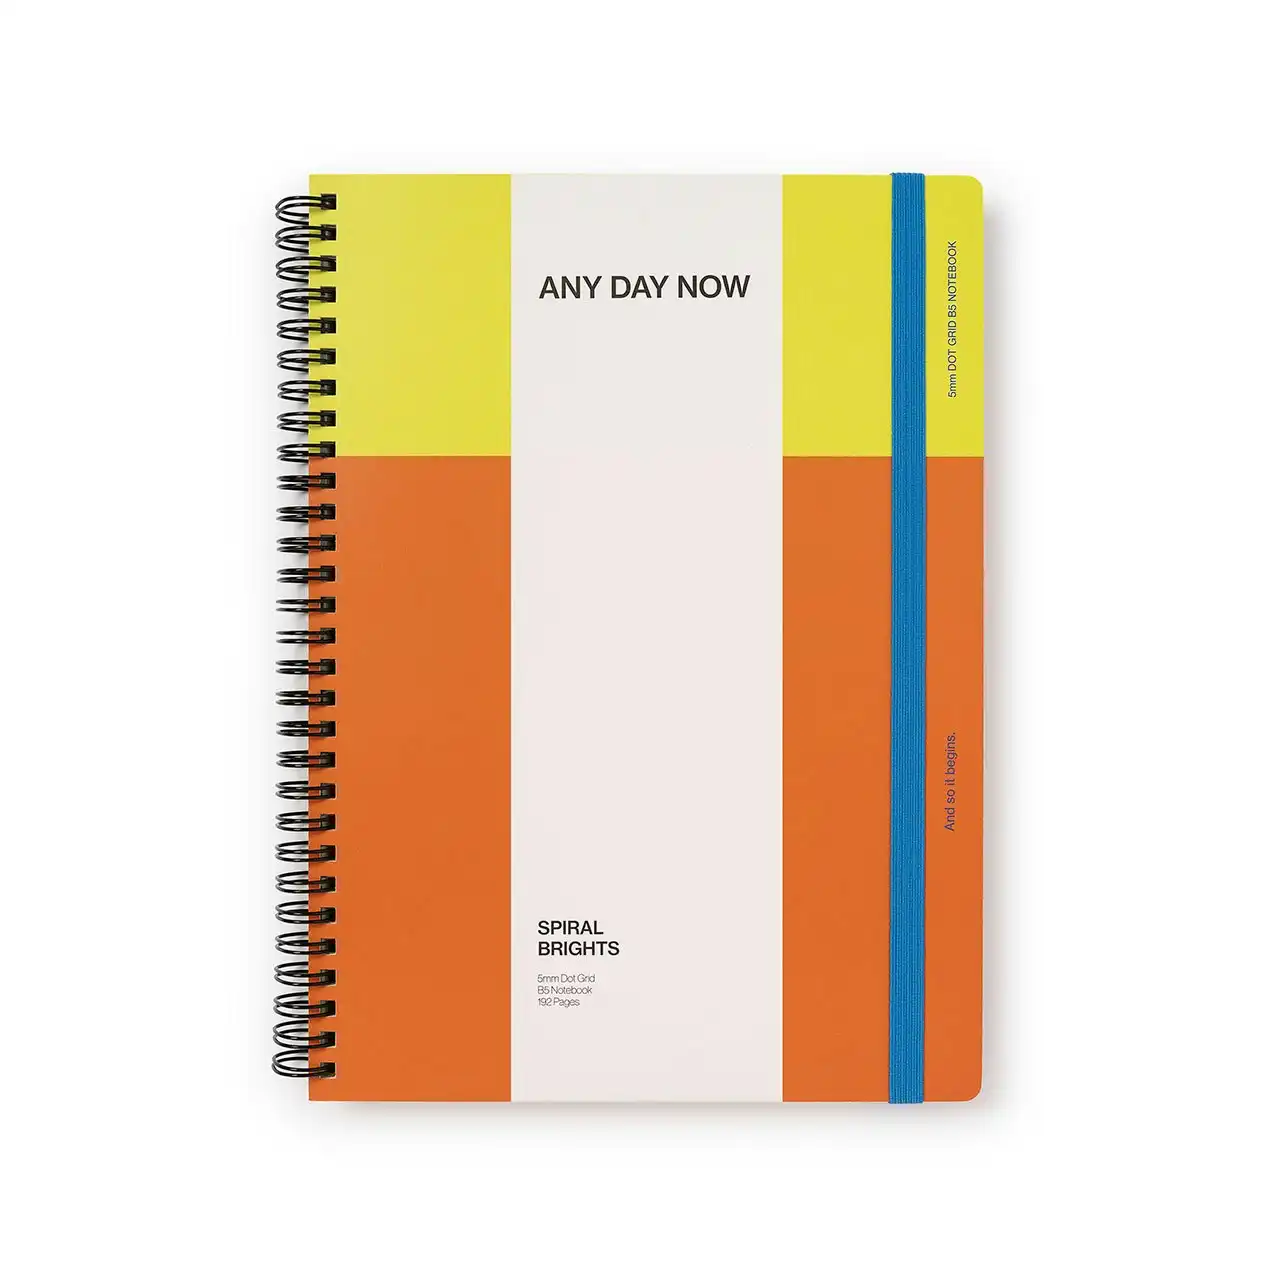 Any Day Now Dot Grid B5 Spiral Notebook Paper Journal 192 Pages Yellow & Orange